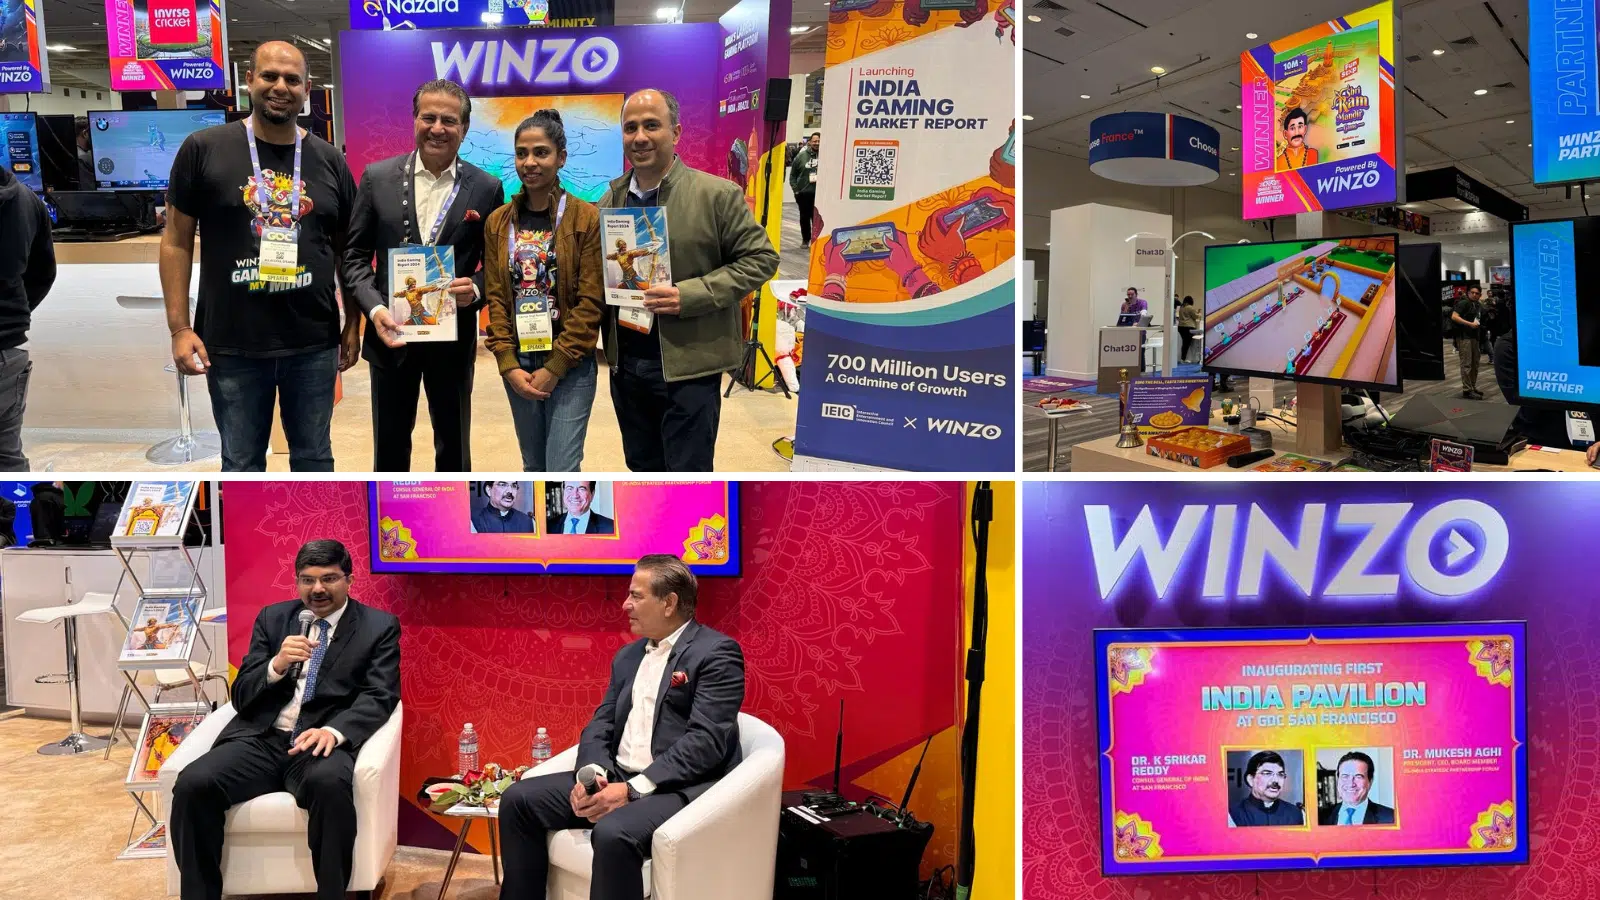 Game Developers Conference (GDC) 2024 Inauguration of the first India Pavilion with USISPF Member WinZo and launch of India Gaming Market Report